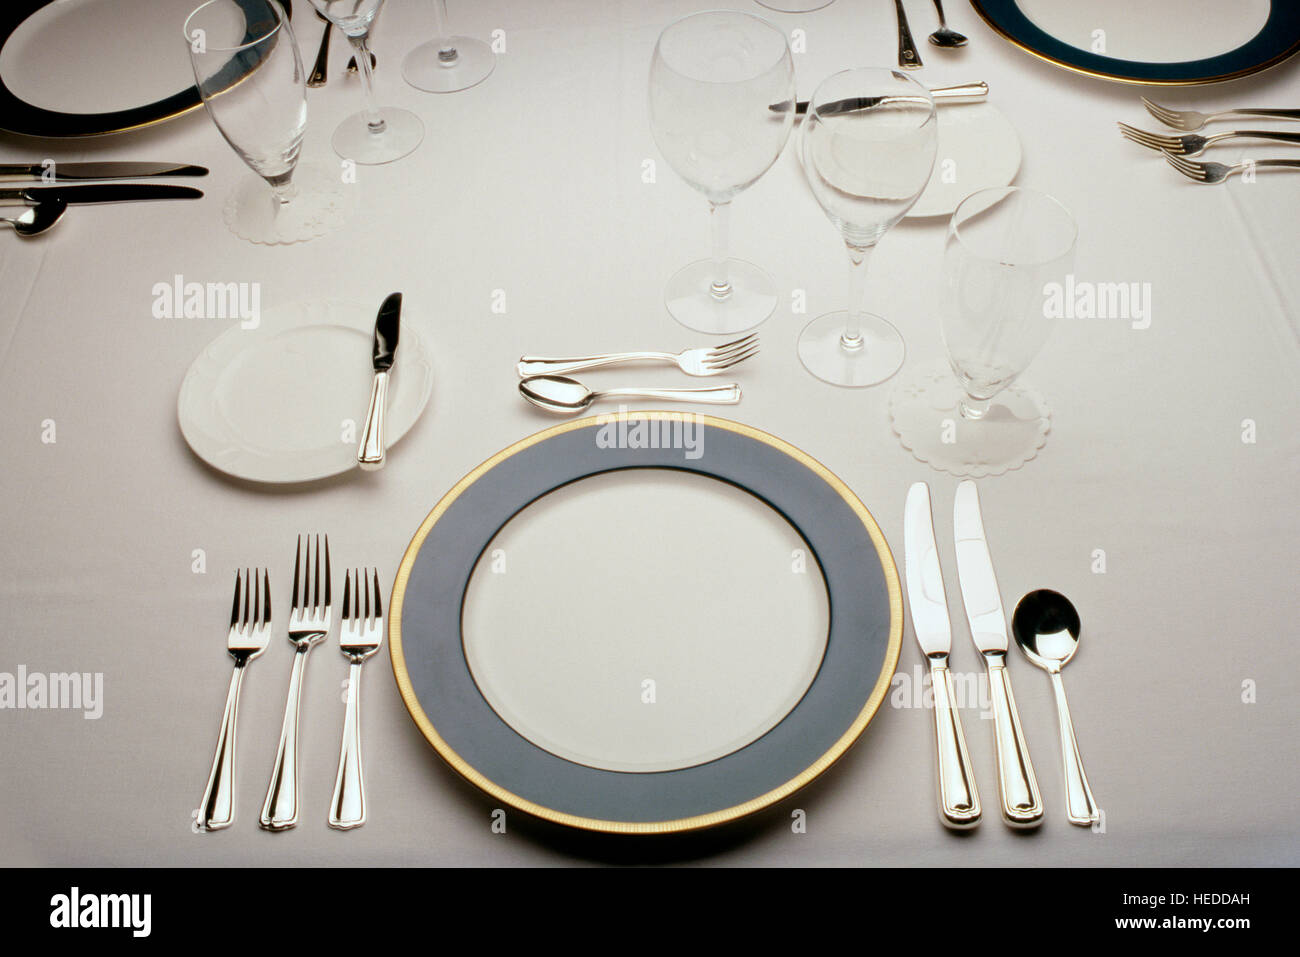 A beautiful, formal dinner setting on a white linen tablecloth. The high end silver service is precisely aligned and polished. Stock Photo